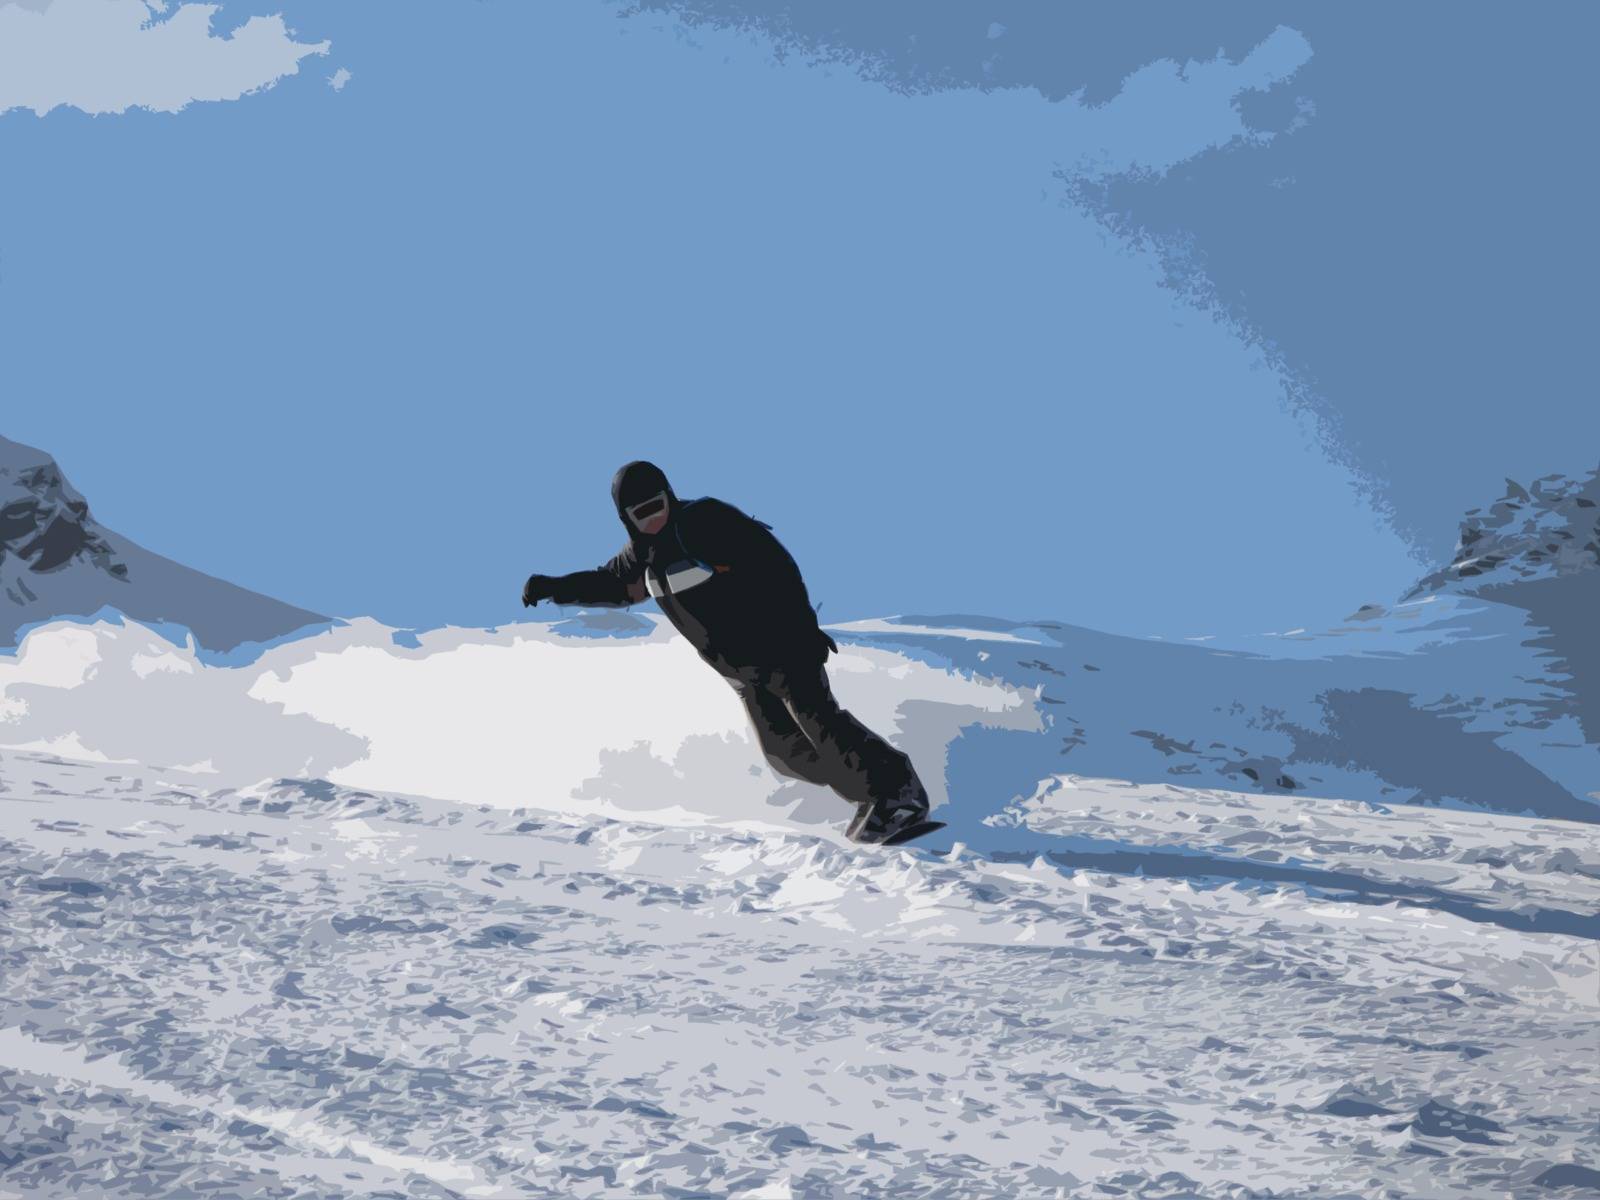 Snowboarder carving a turn on the piste